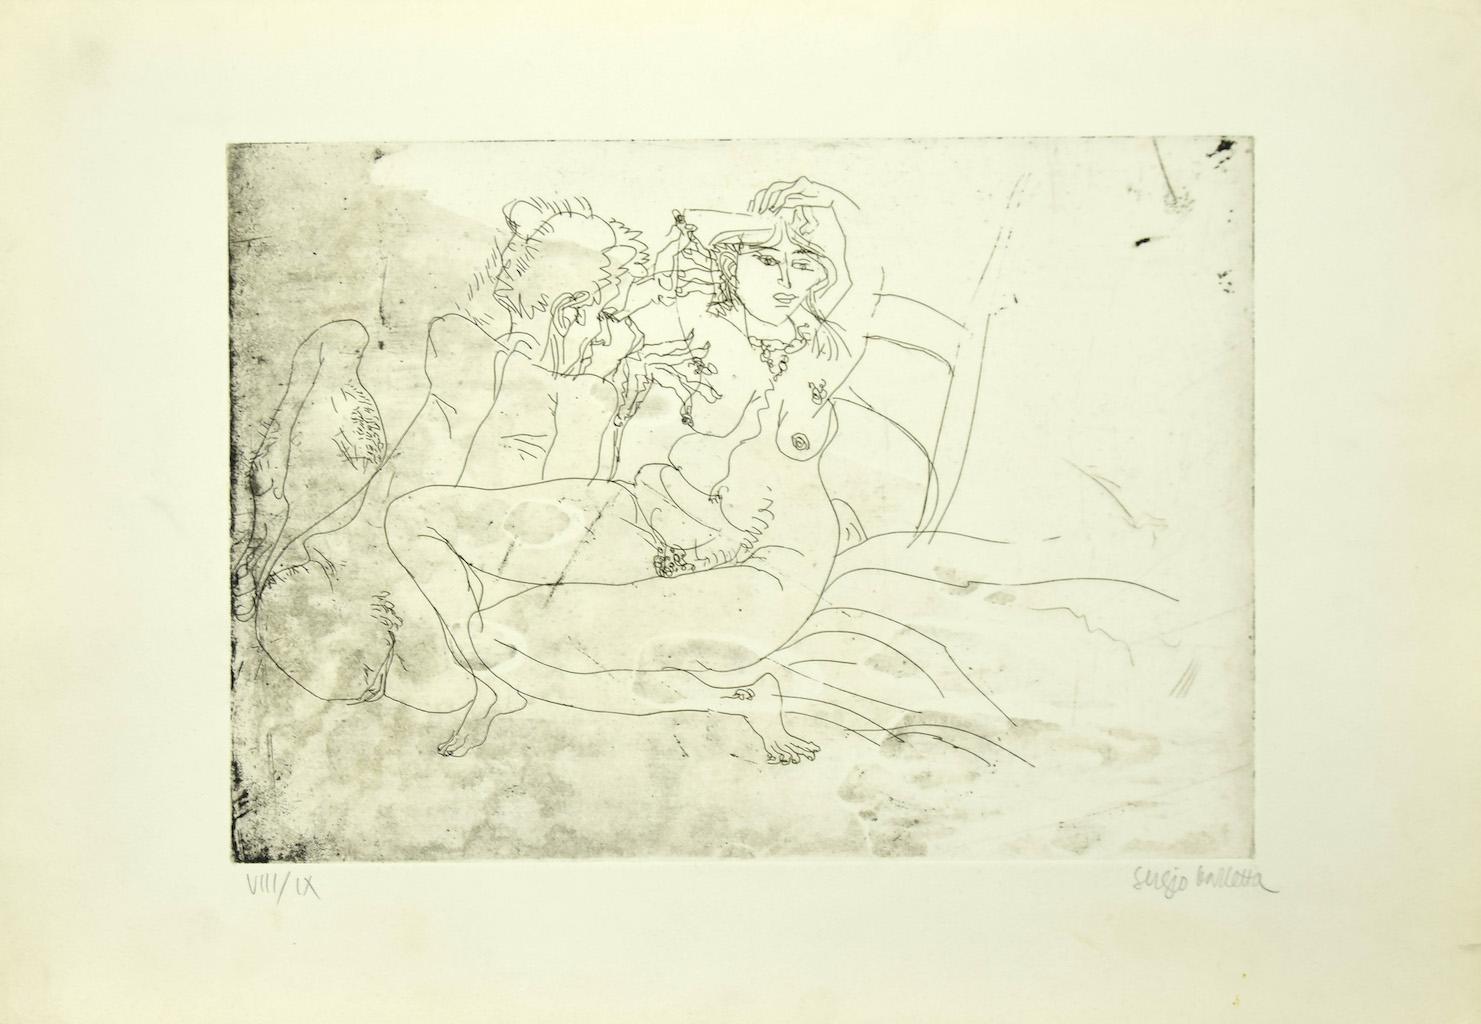 The Couple is an original etching realized by Sergio Barletta in 1975 ca.

Hand-signed on the lower right in pencil. Numbered in Roman numerals, edition of VIII/IX prints, on the lower left in pencil.

In very good conditions. Image Dimensions: 24 x